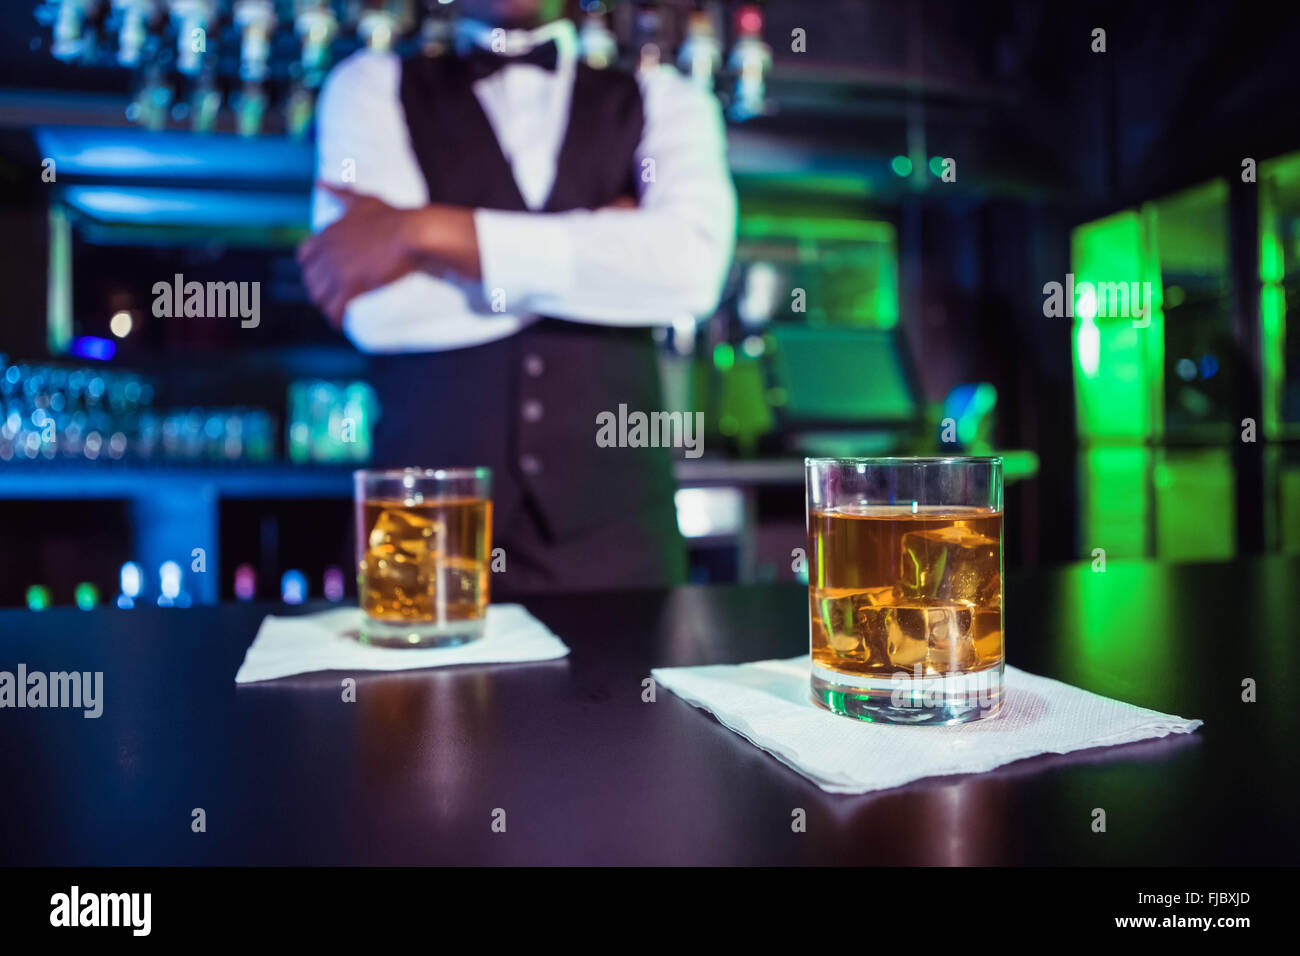 Two glasses of whiskey on bar counter Stock Photo